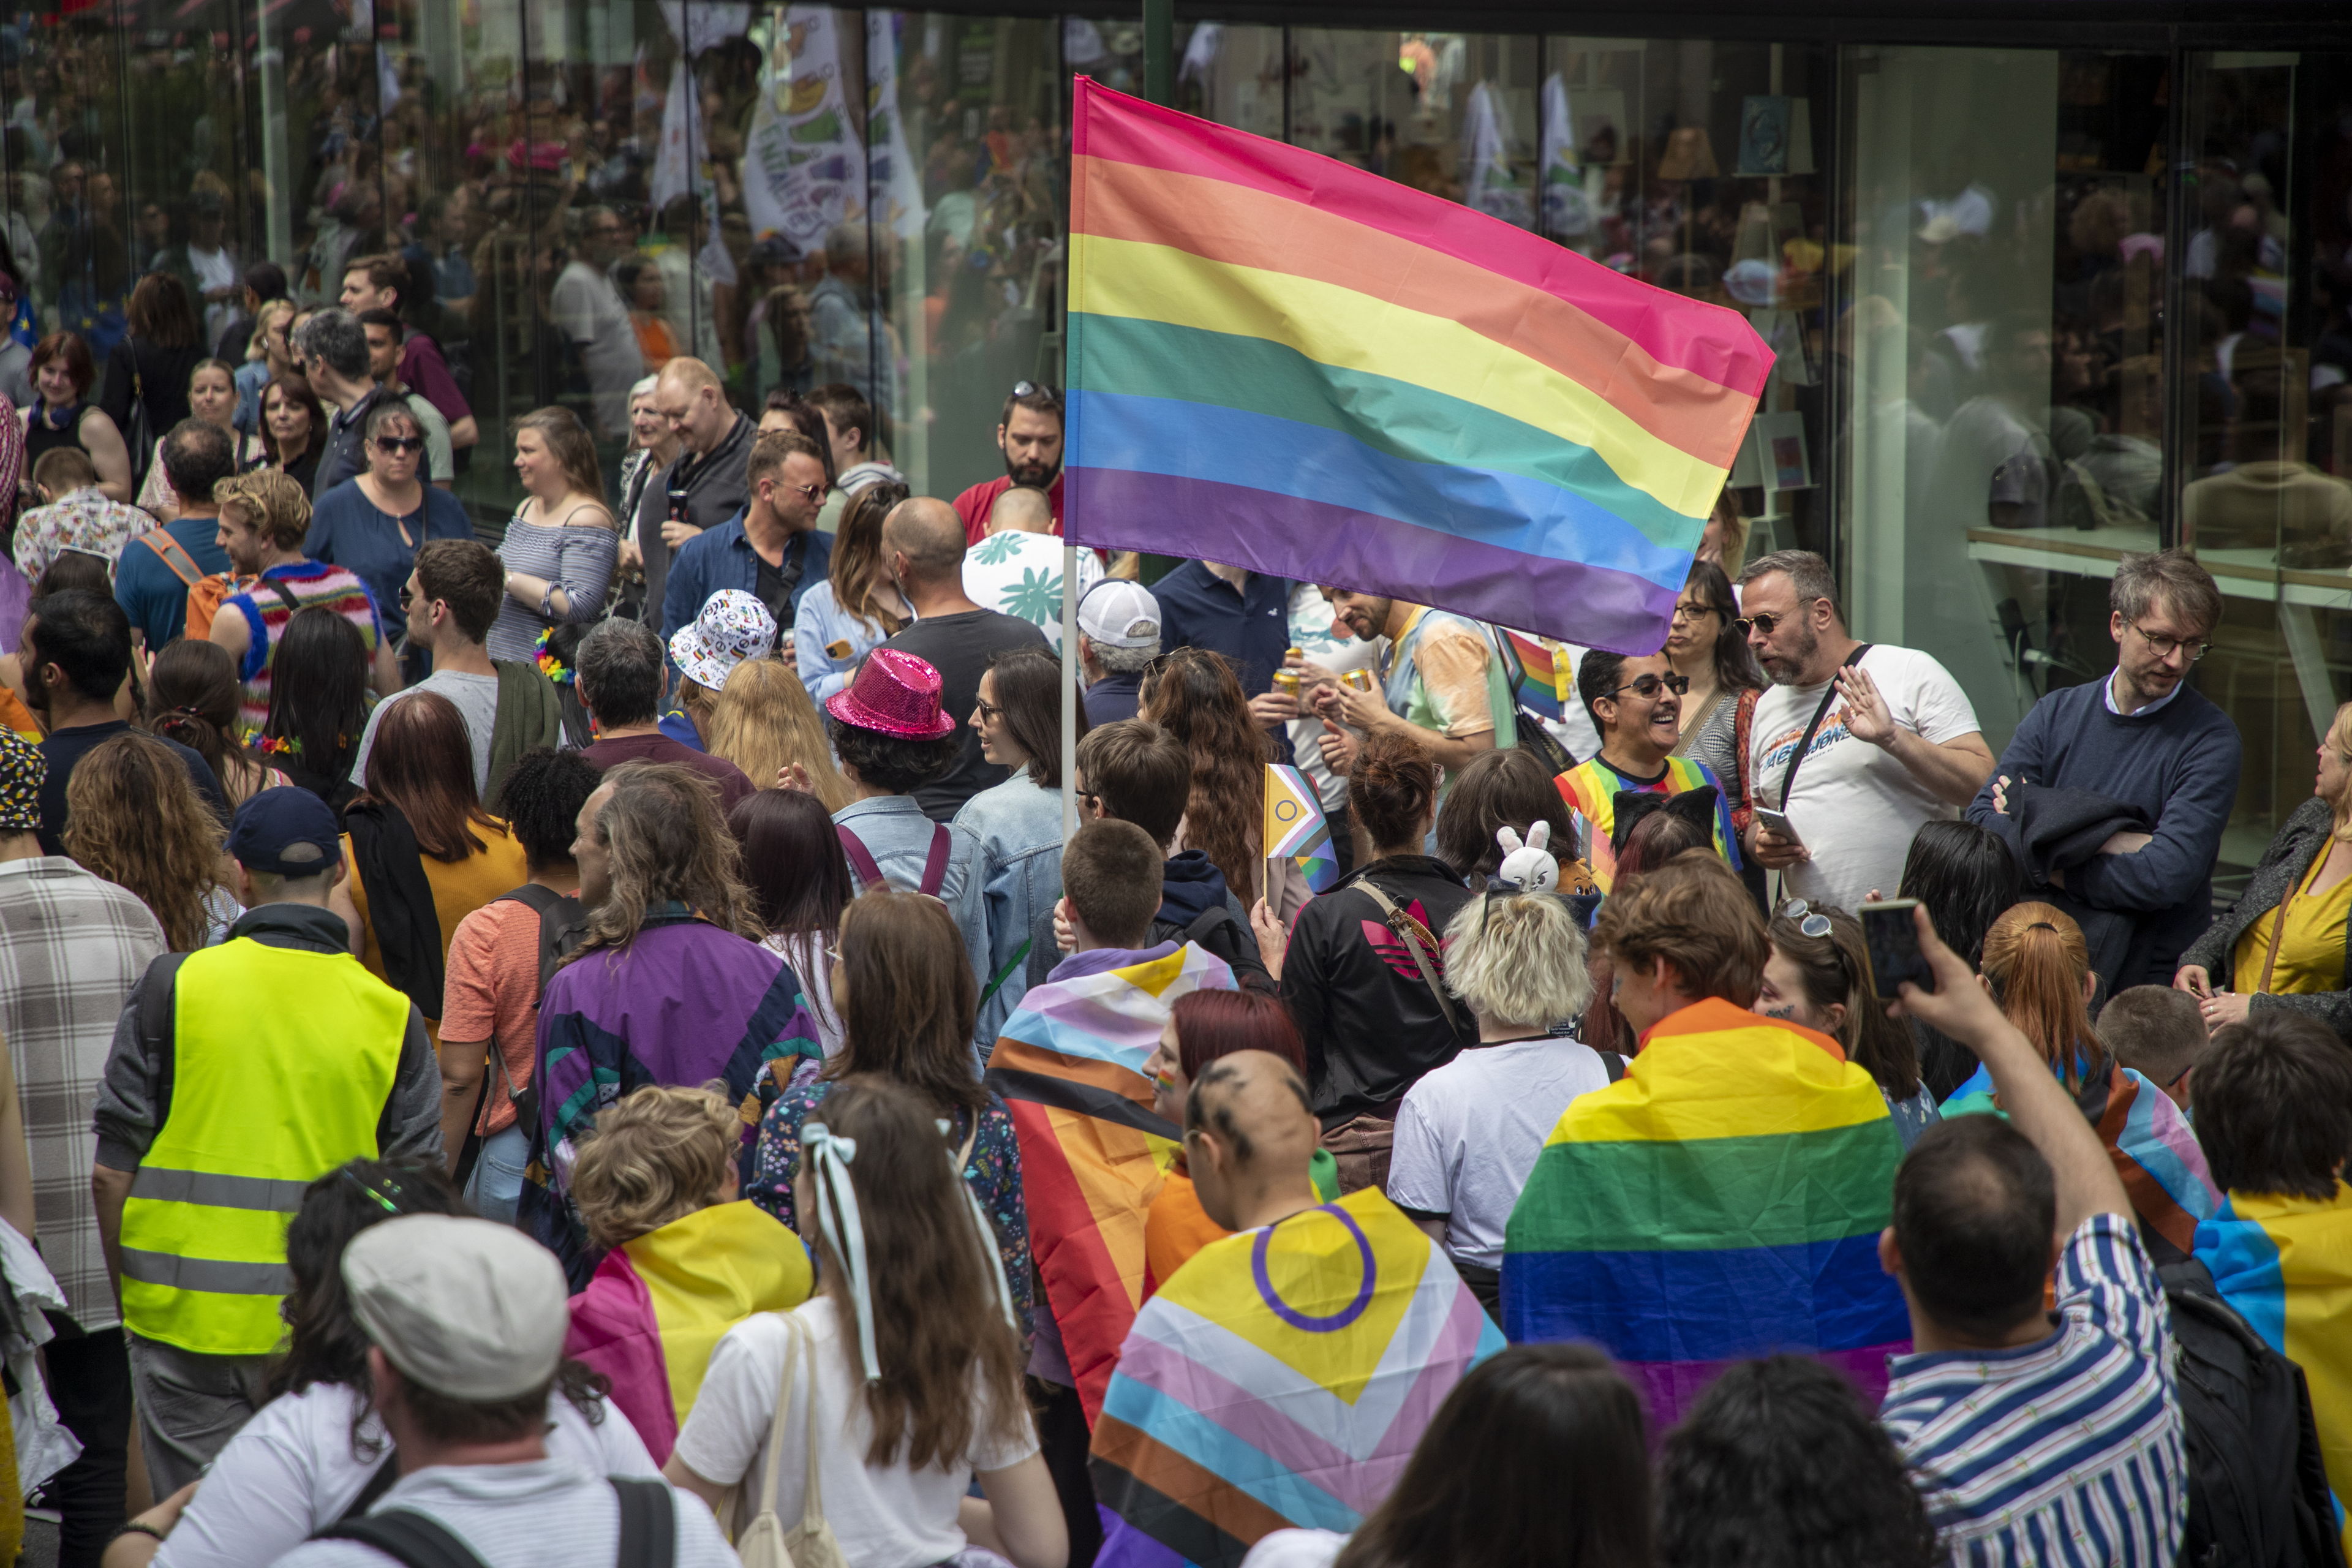 Two thirds of LGBTIQ+ people faced humiliation, ridicule or threats at school